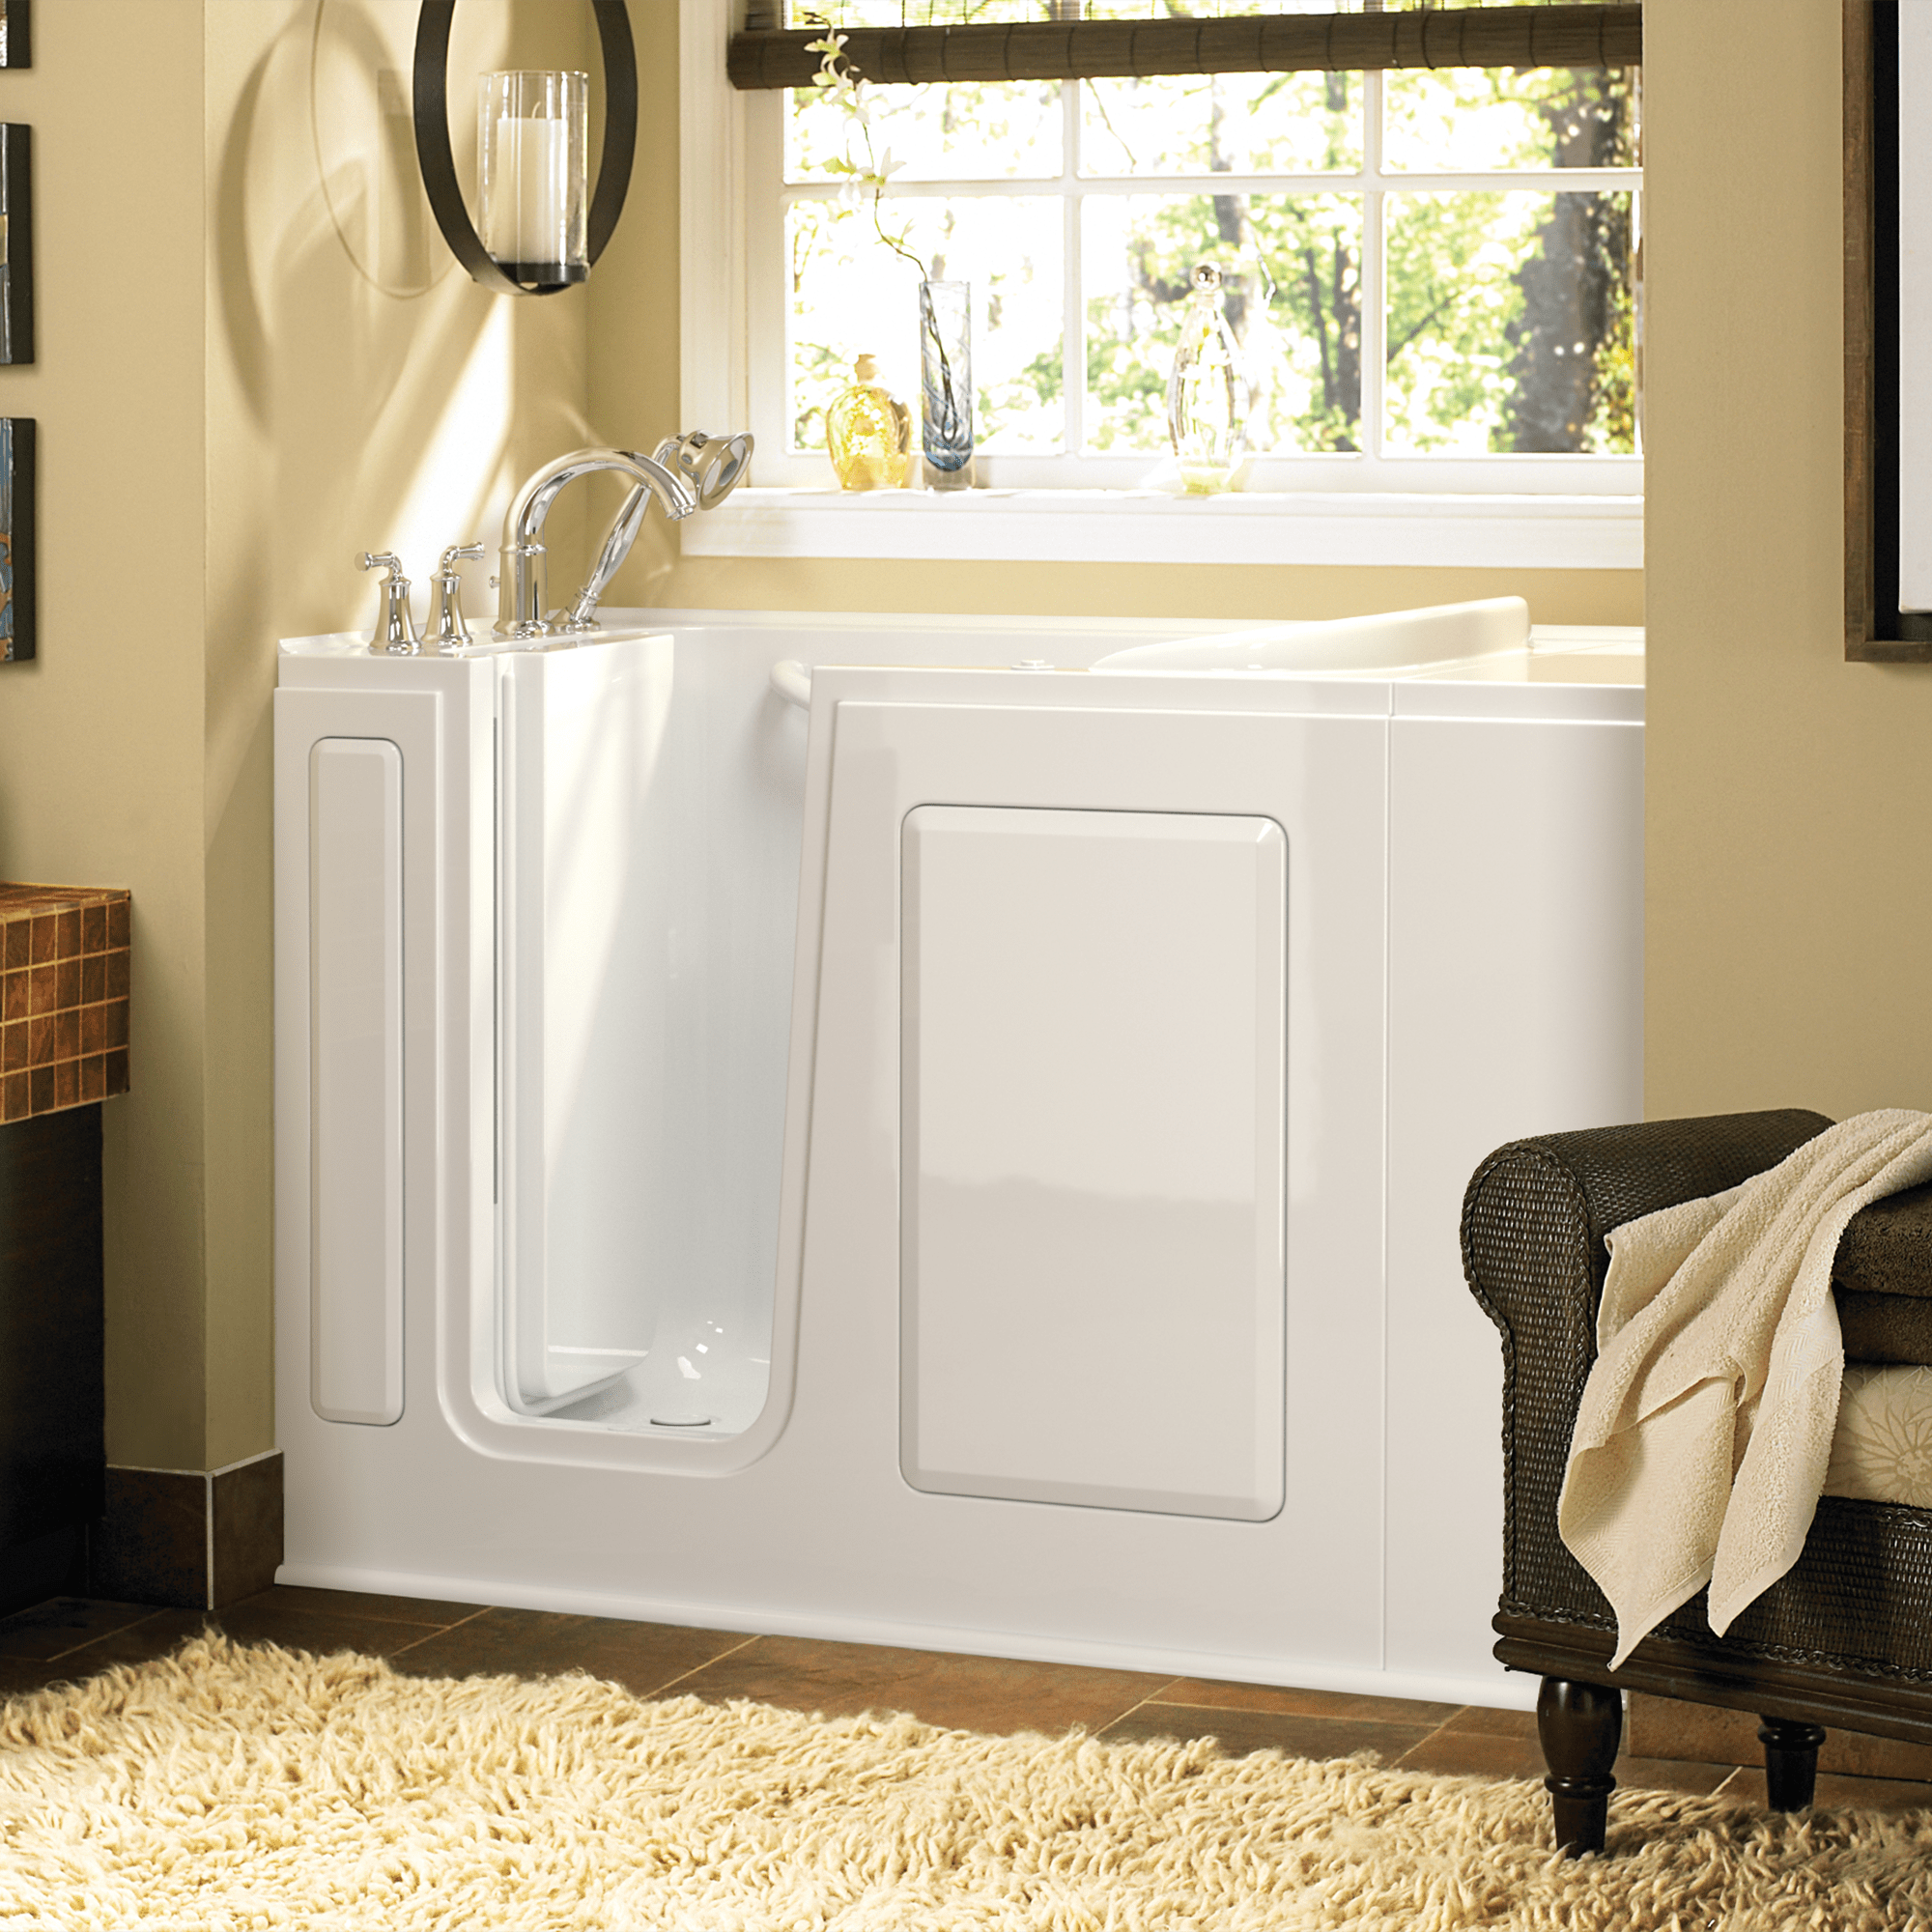 Gelcoat 28x48 Inch Walk in Bathtub with Whirlpool System  Left Hand Door and Drain WIB WHITE